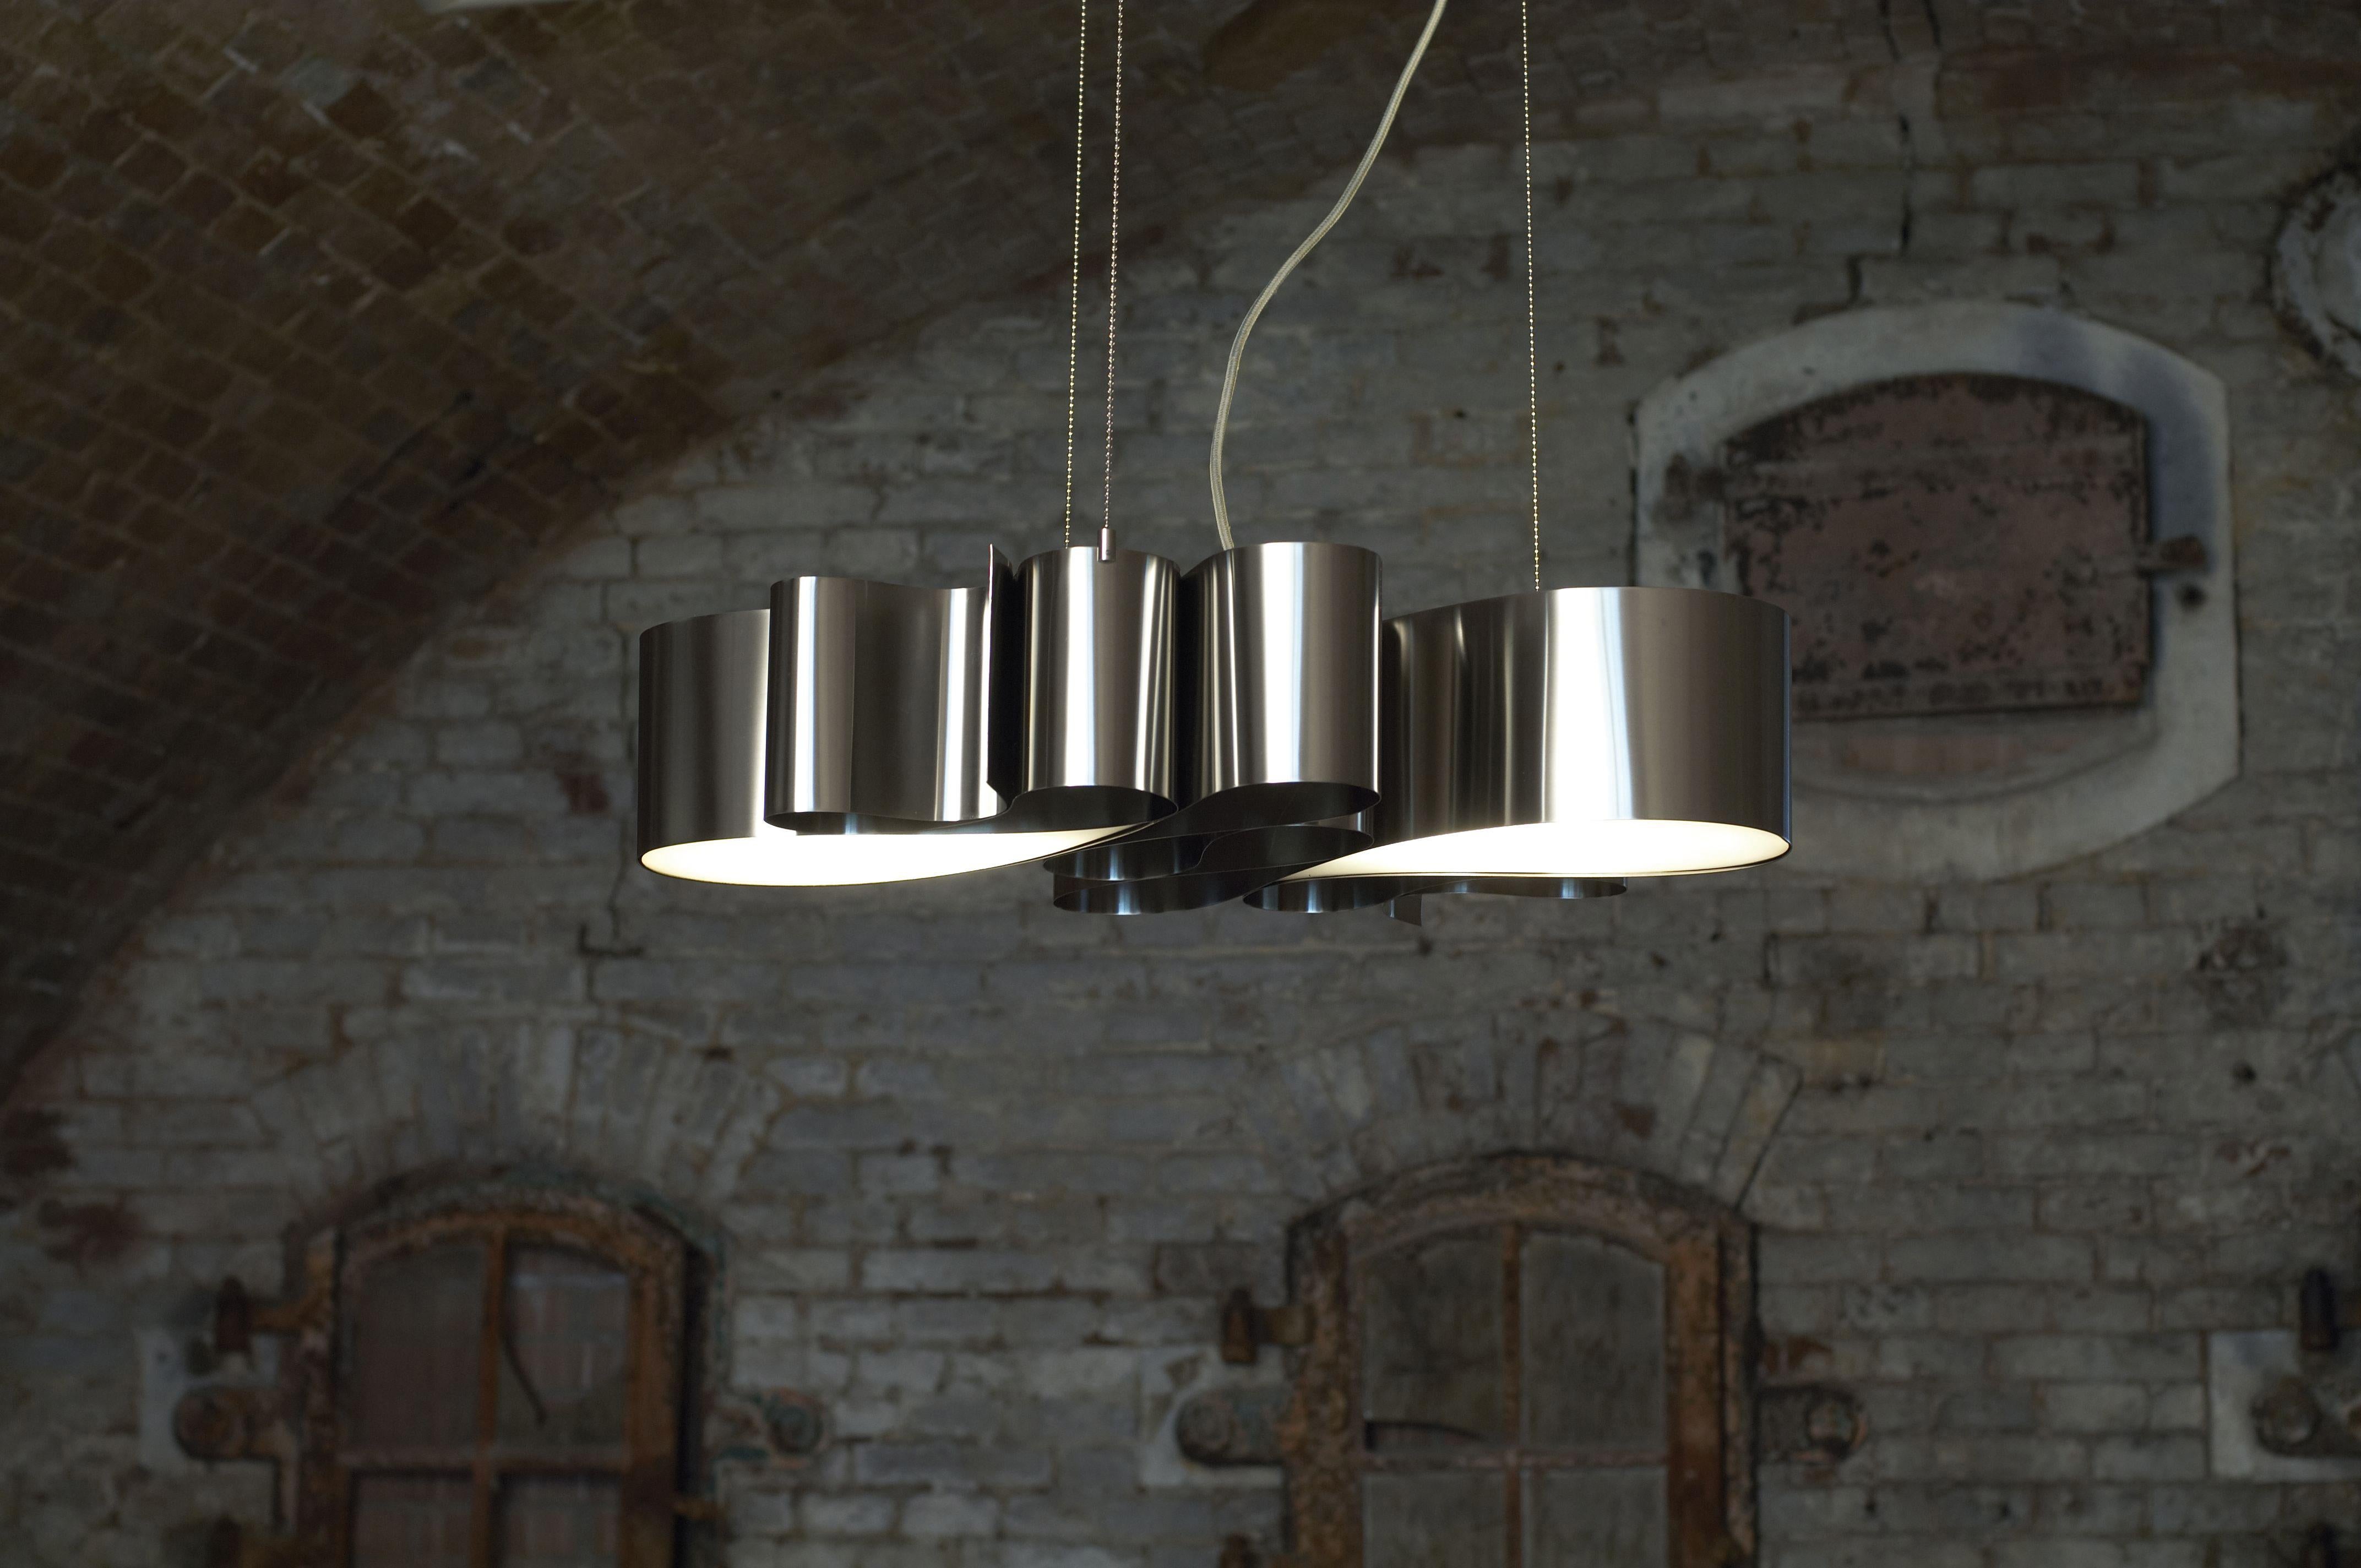 Handmade in Holland not only has a nice “ring” to it, it means Jacco Maris’ fixtures exhibit exemplary quality and jaw-dropping style only a lover of experimentation could achieve. 

The Paraaf pendant was created by hand from a single strip of